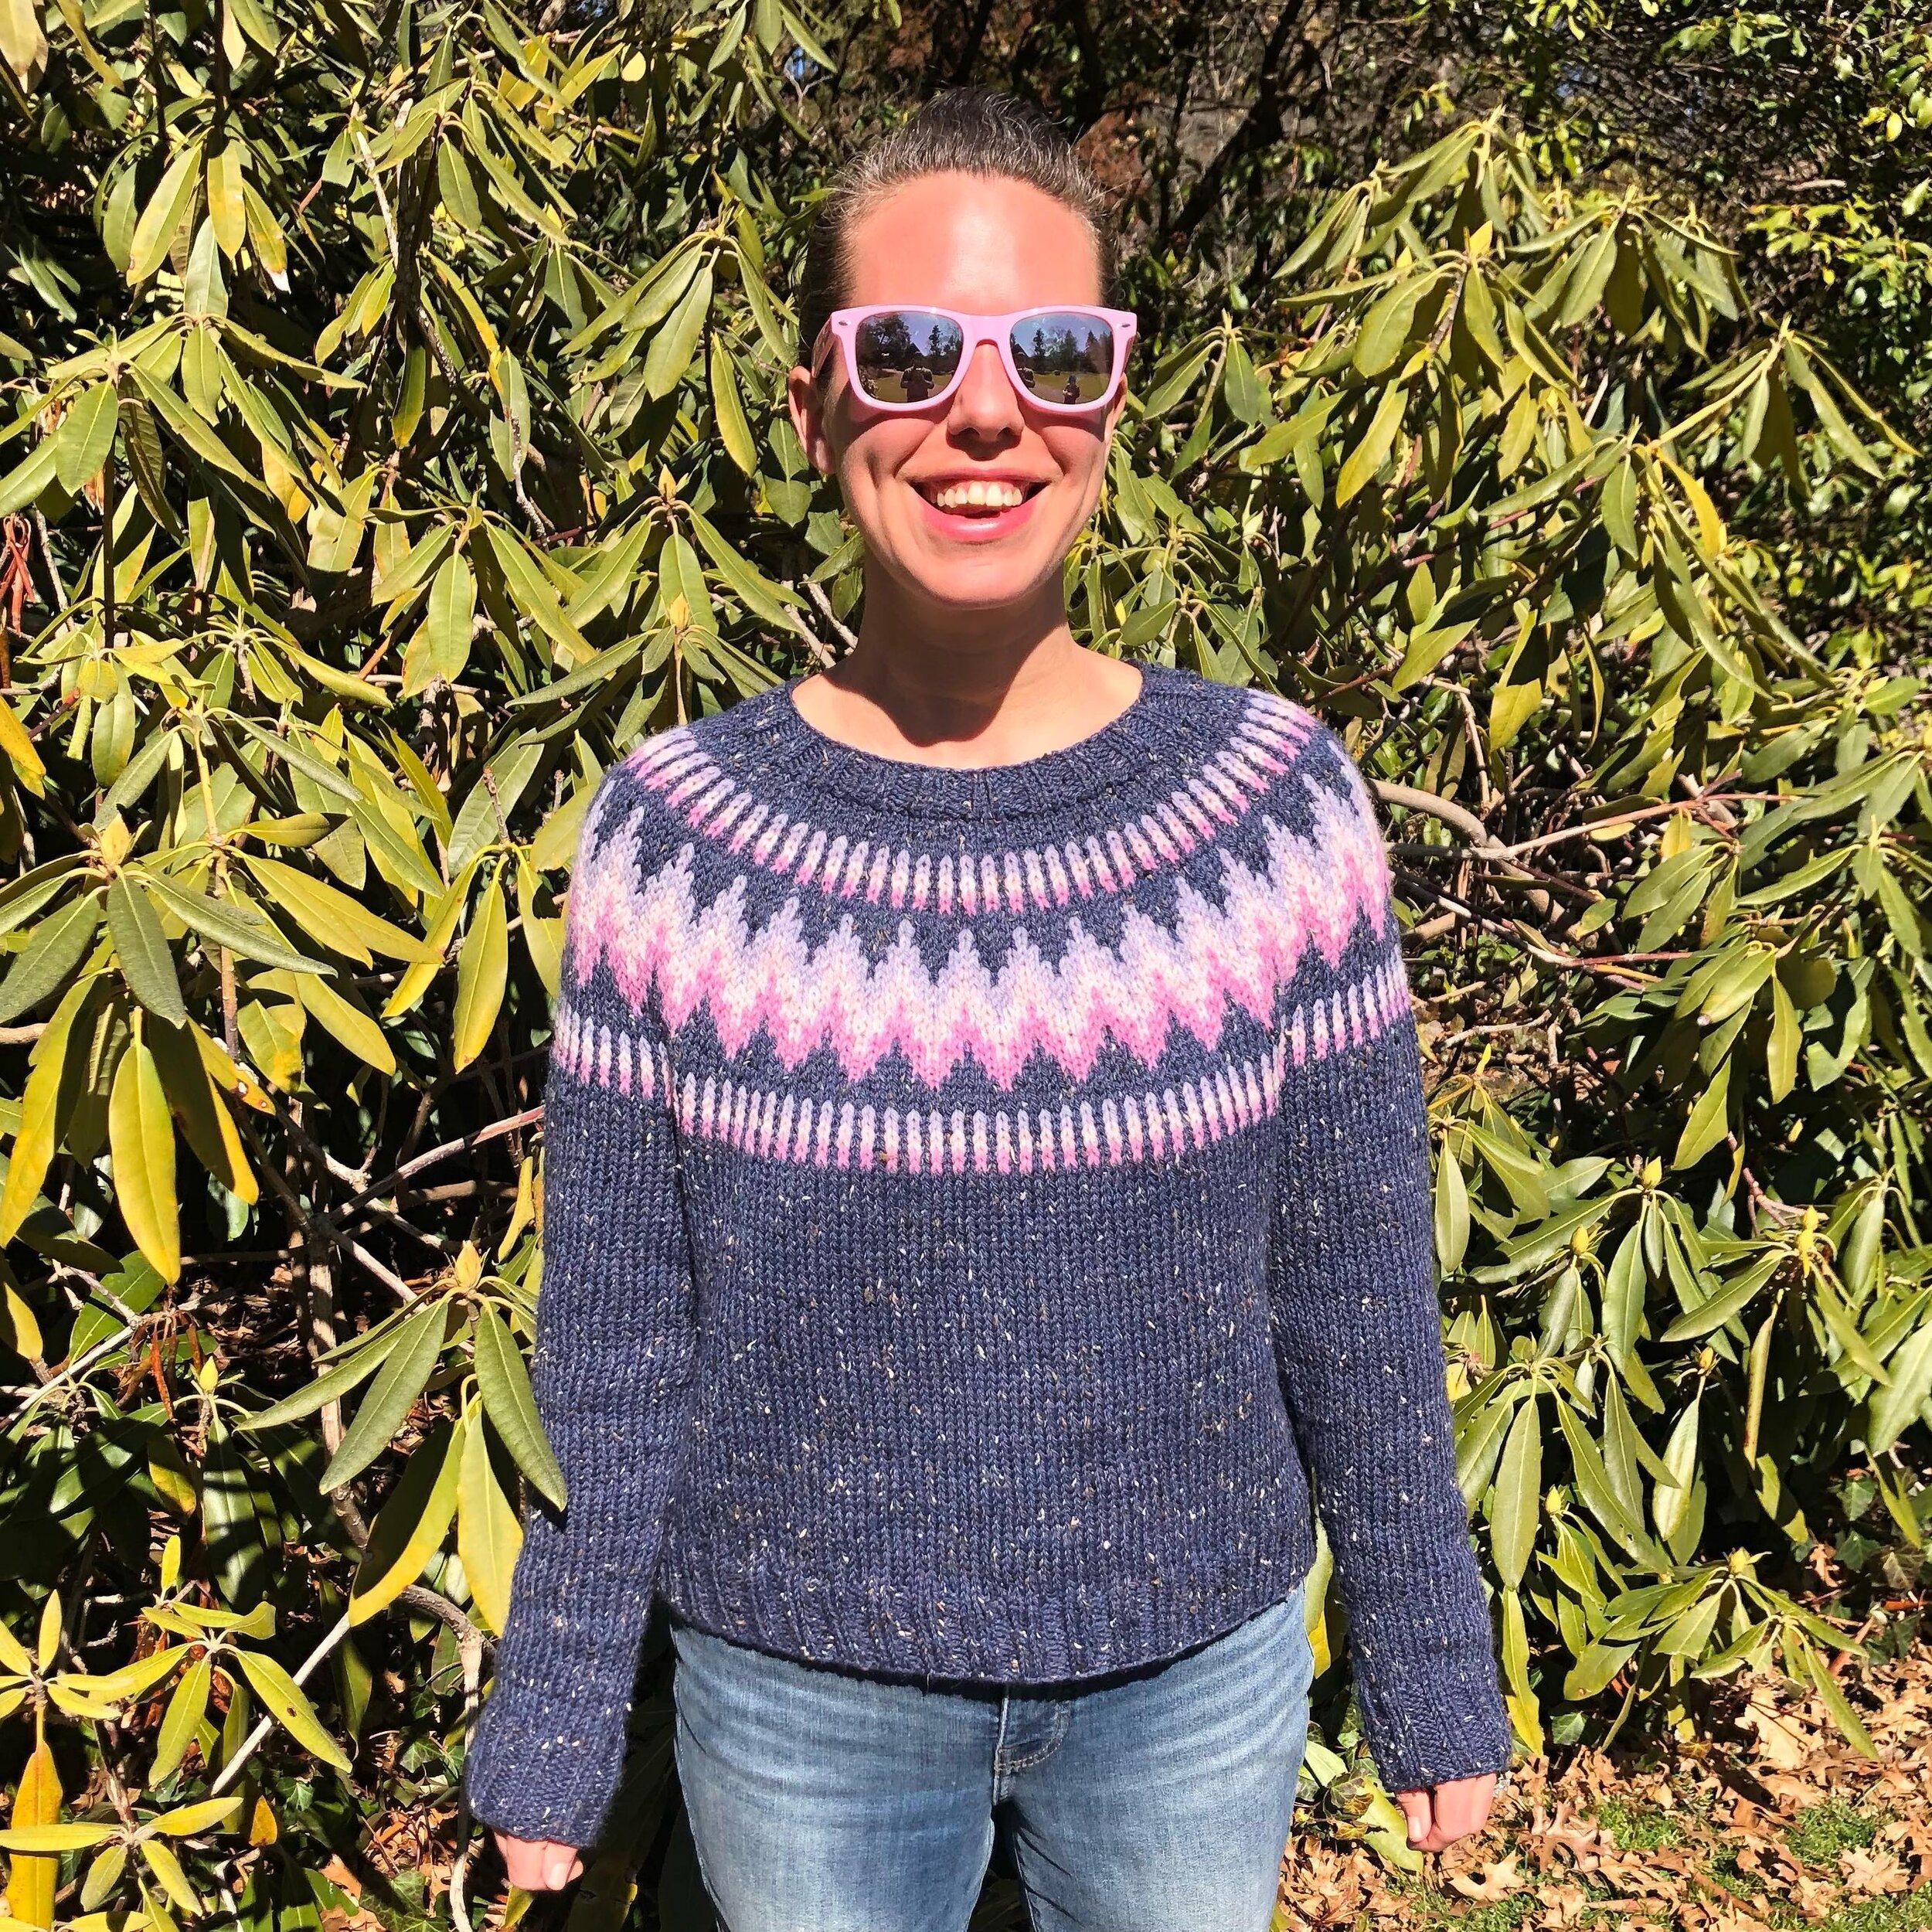 My finished #throwoversweater! 🙌 Wore it for the first time today (not quite realizing how warm it was going to get outside!) and it felt great, yay for the magical temperature regulating properties of natural wool! Made the size 3 to pattern with t